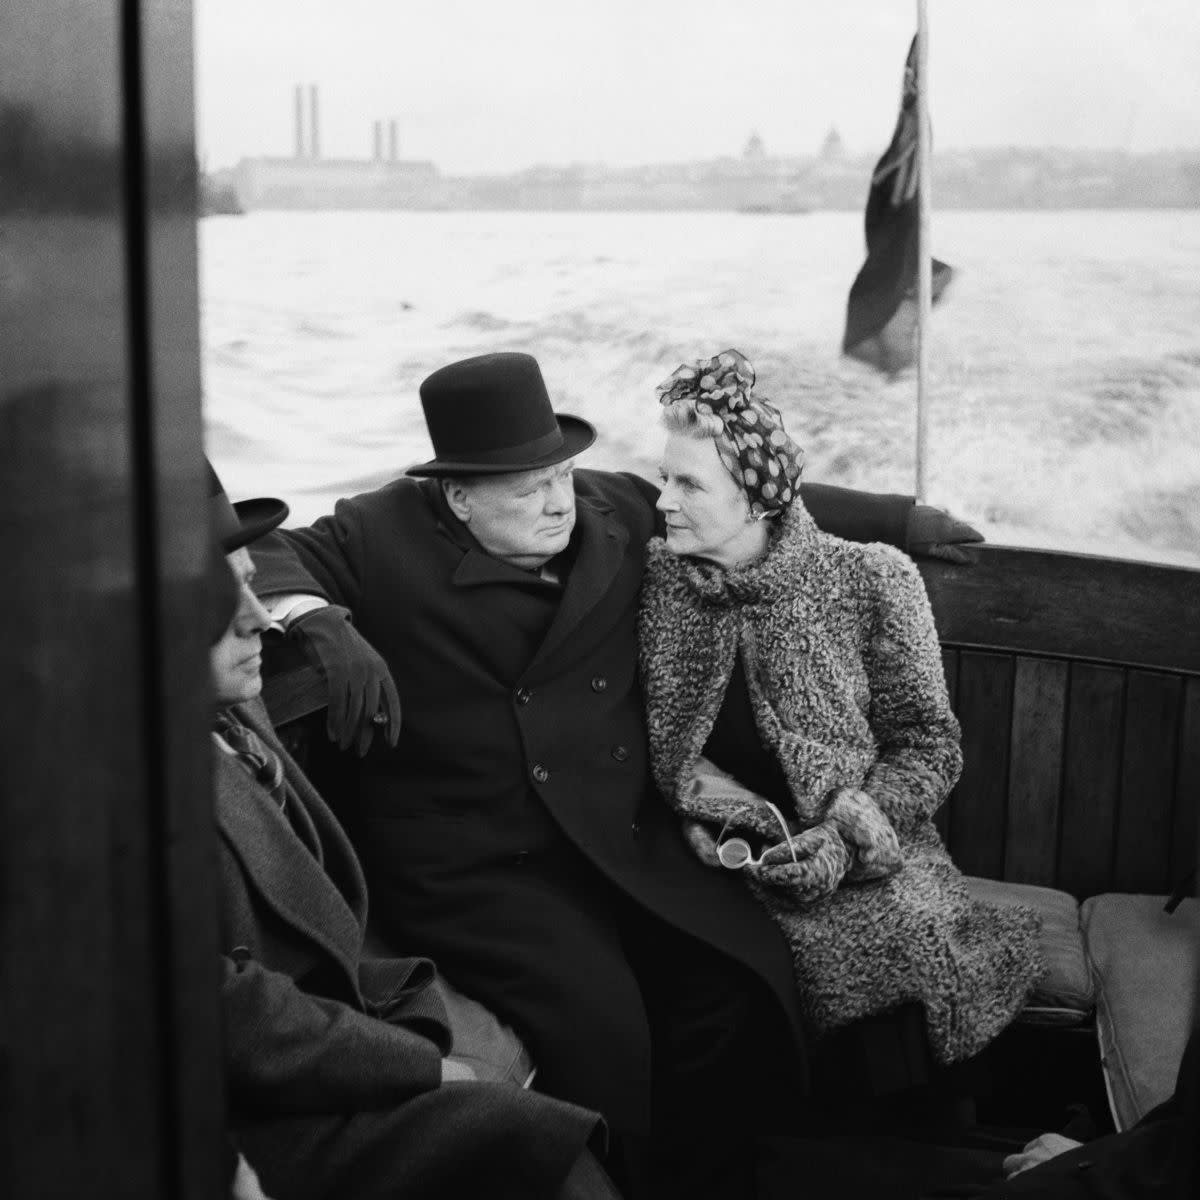 Winston Churchill and his wife Clementine sit on board a naval auxiliary patrol vessel as it travels down the Thames towards docks in east London during the Second World War on Sept. 25, 1940.